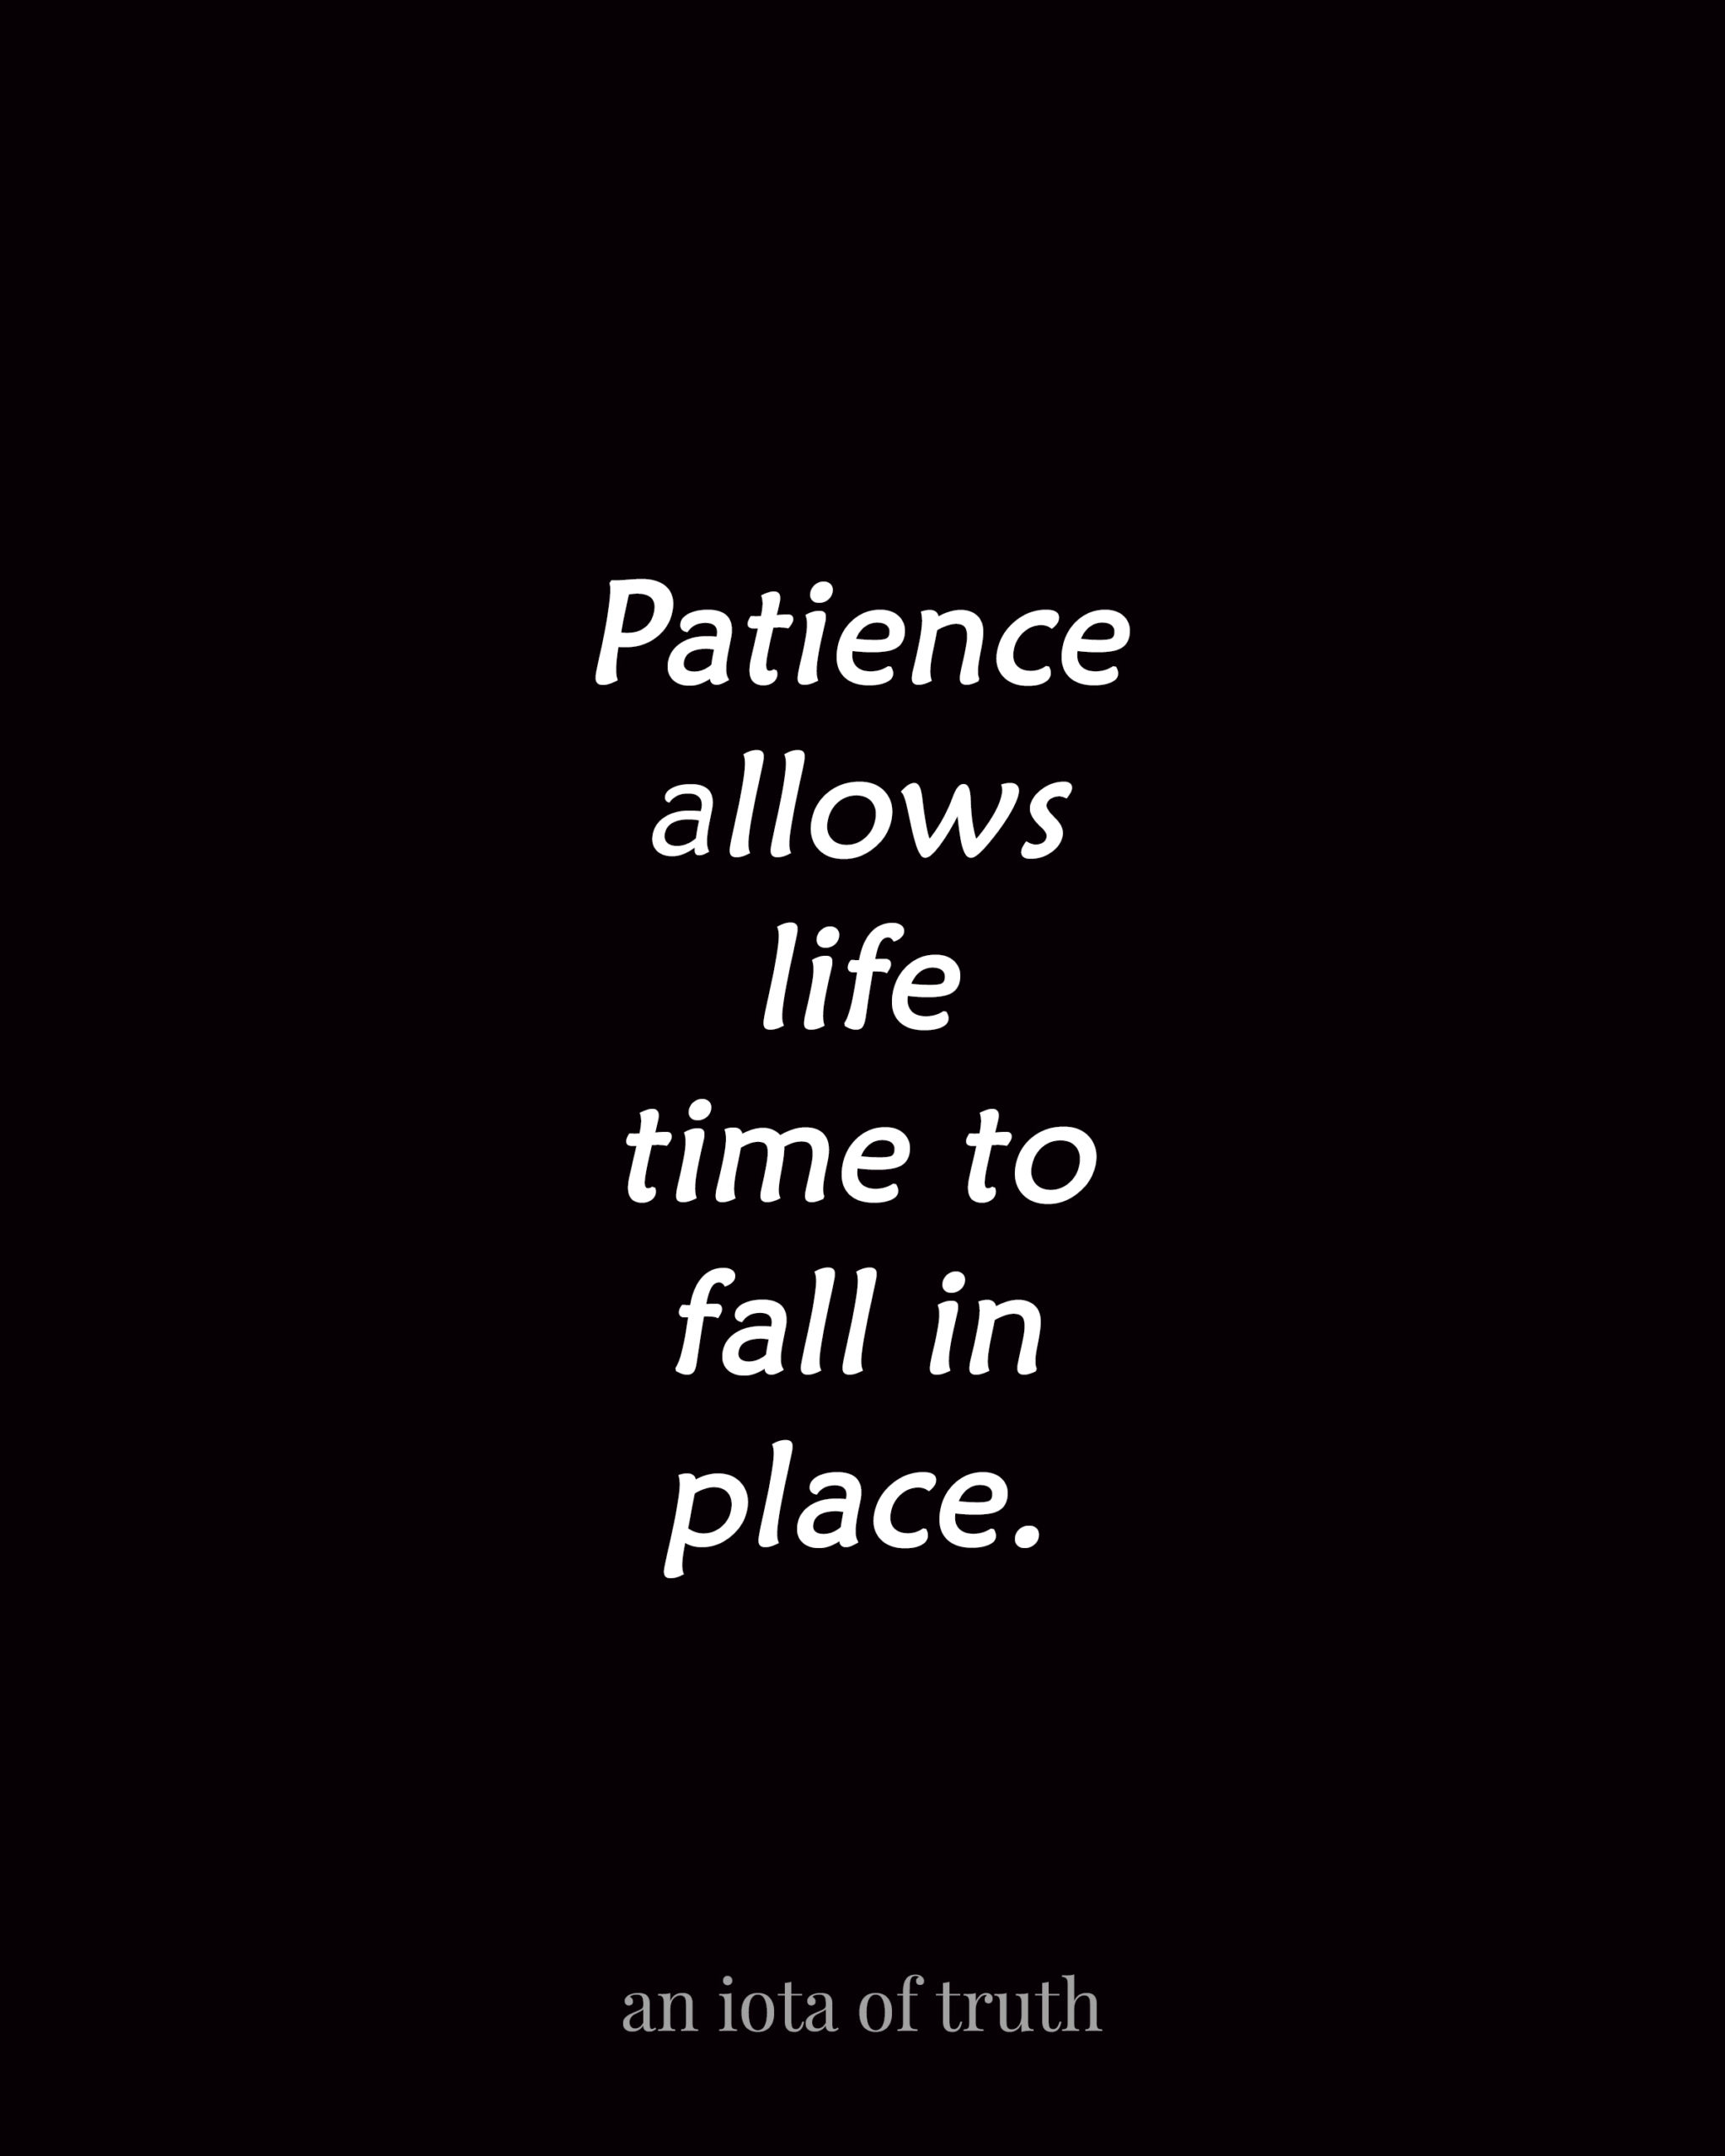 Patience allows life time to fall in place.